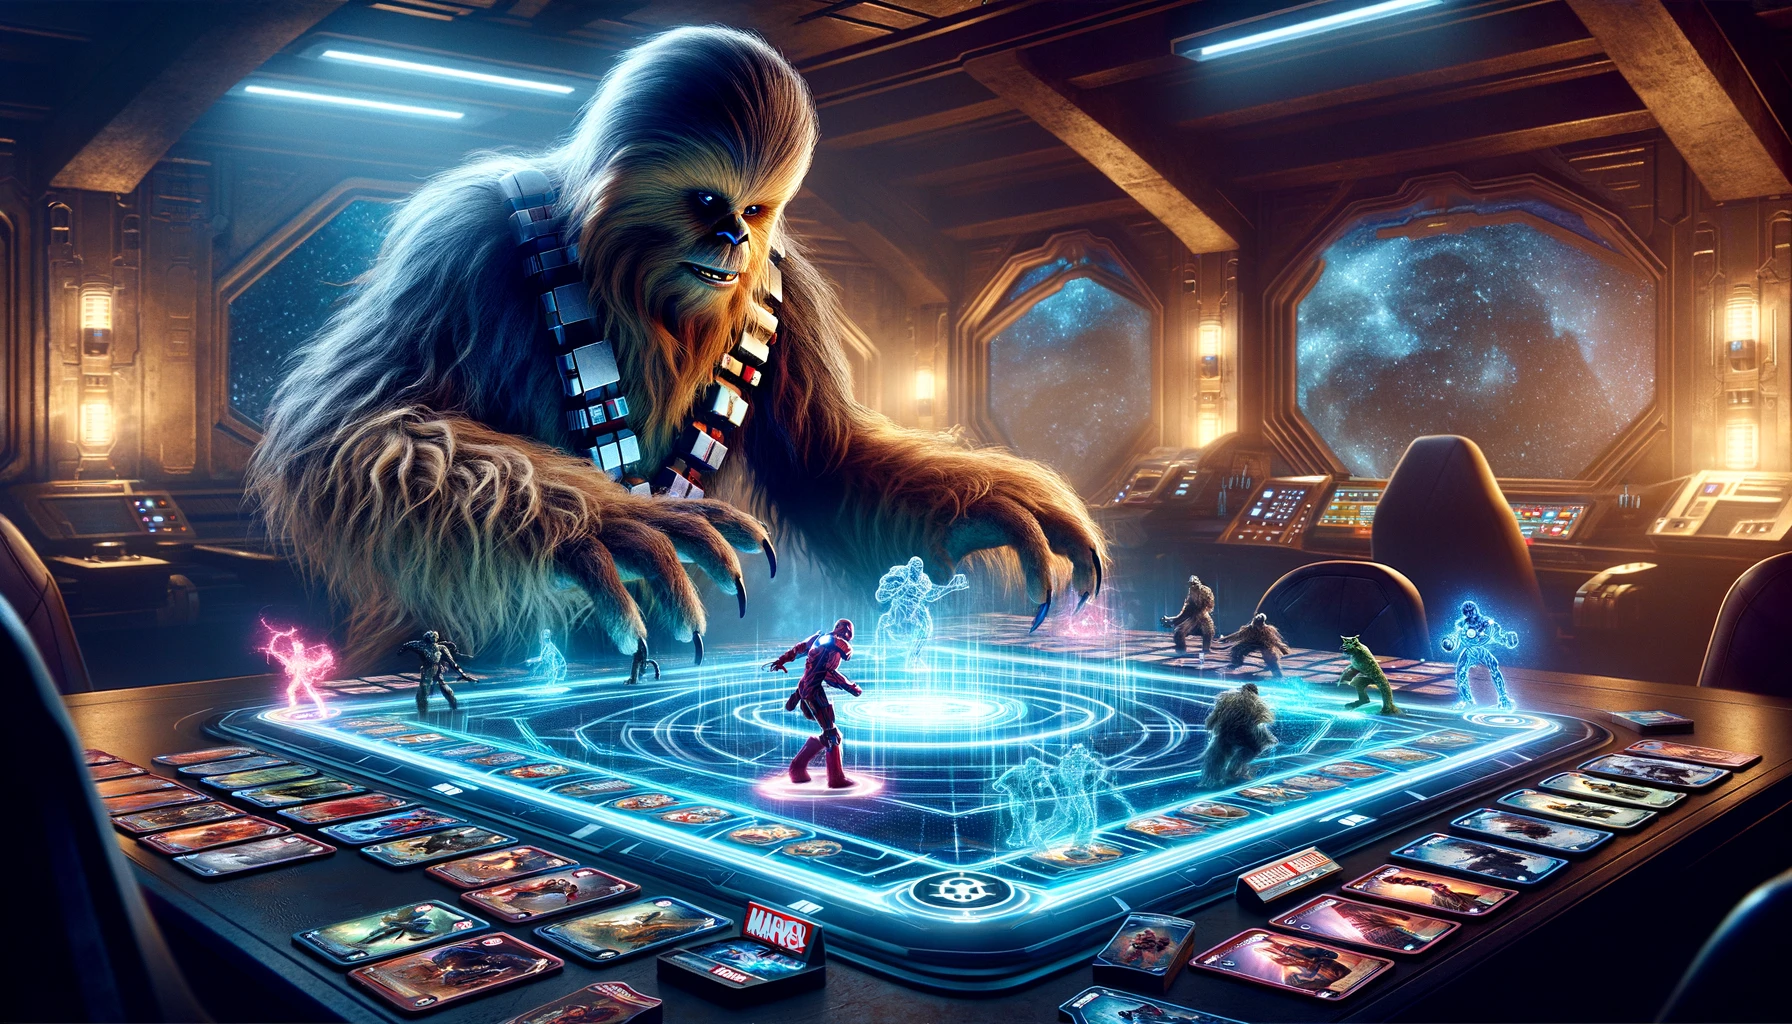 A digital illustration of a Marvel Snap game session featuring a player deeply engrossed in strategic gameplay with superhero cards illuminated by glowing energy.